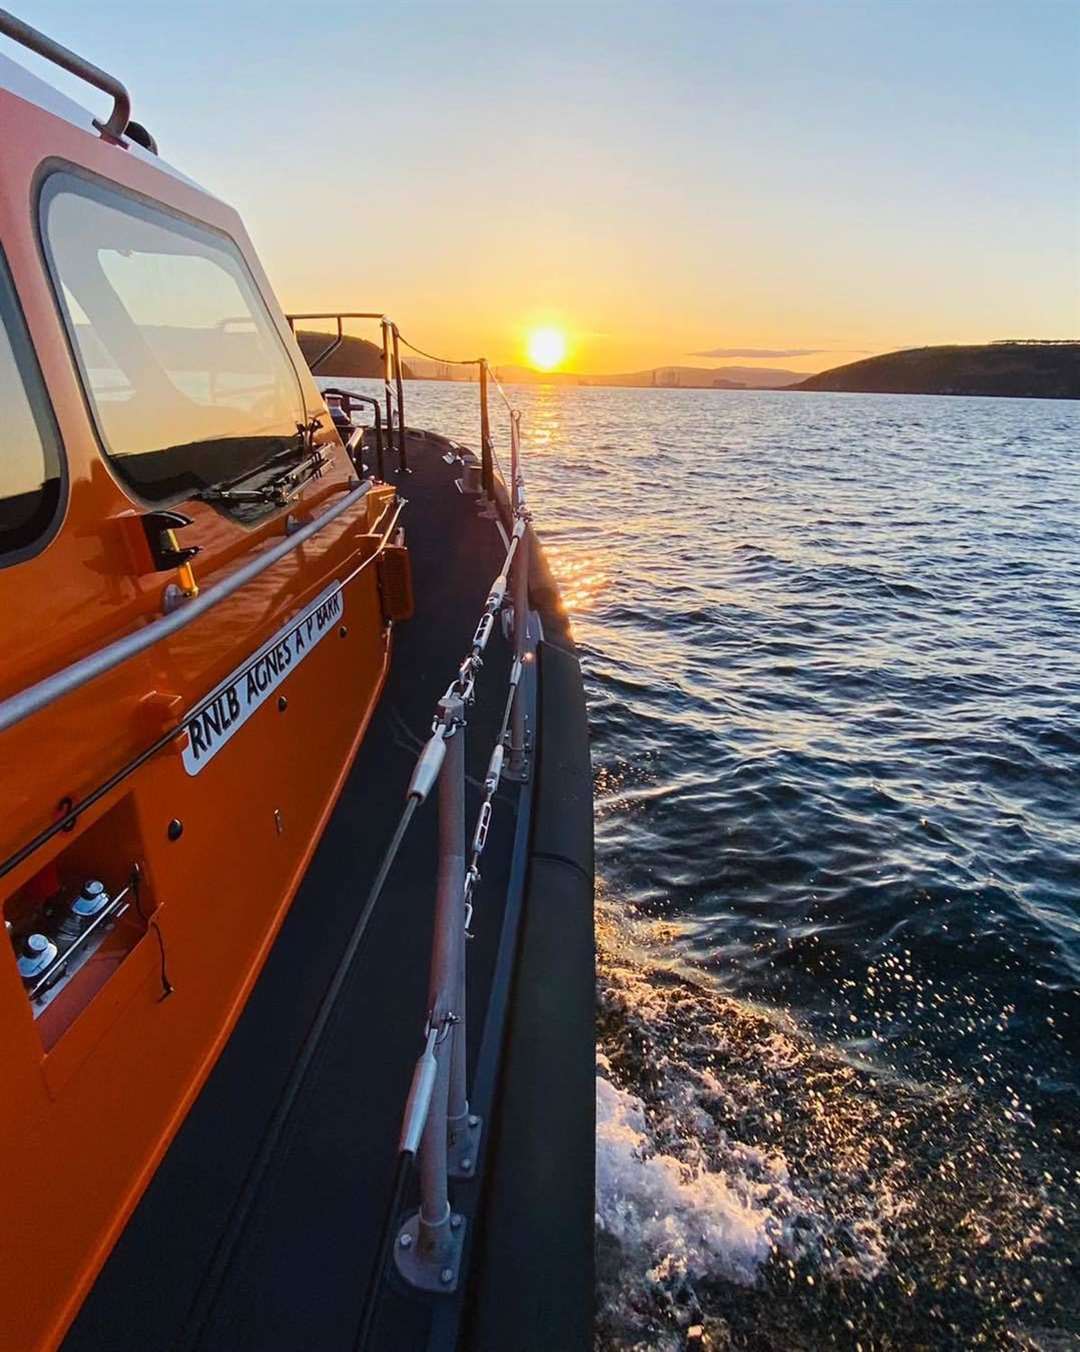 Agnes AP Barr has been on active duty at Invergordon now for three months. Picture: RNLI Invergordon